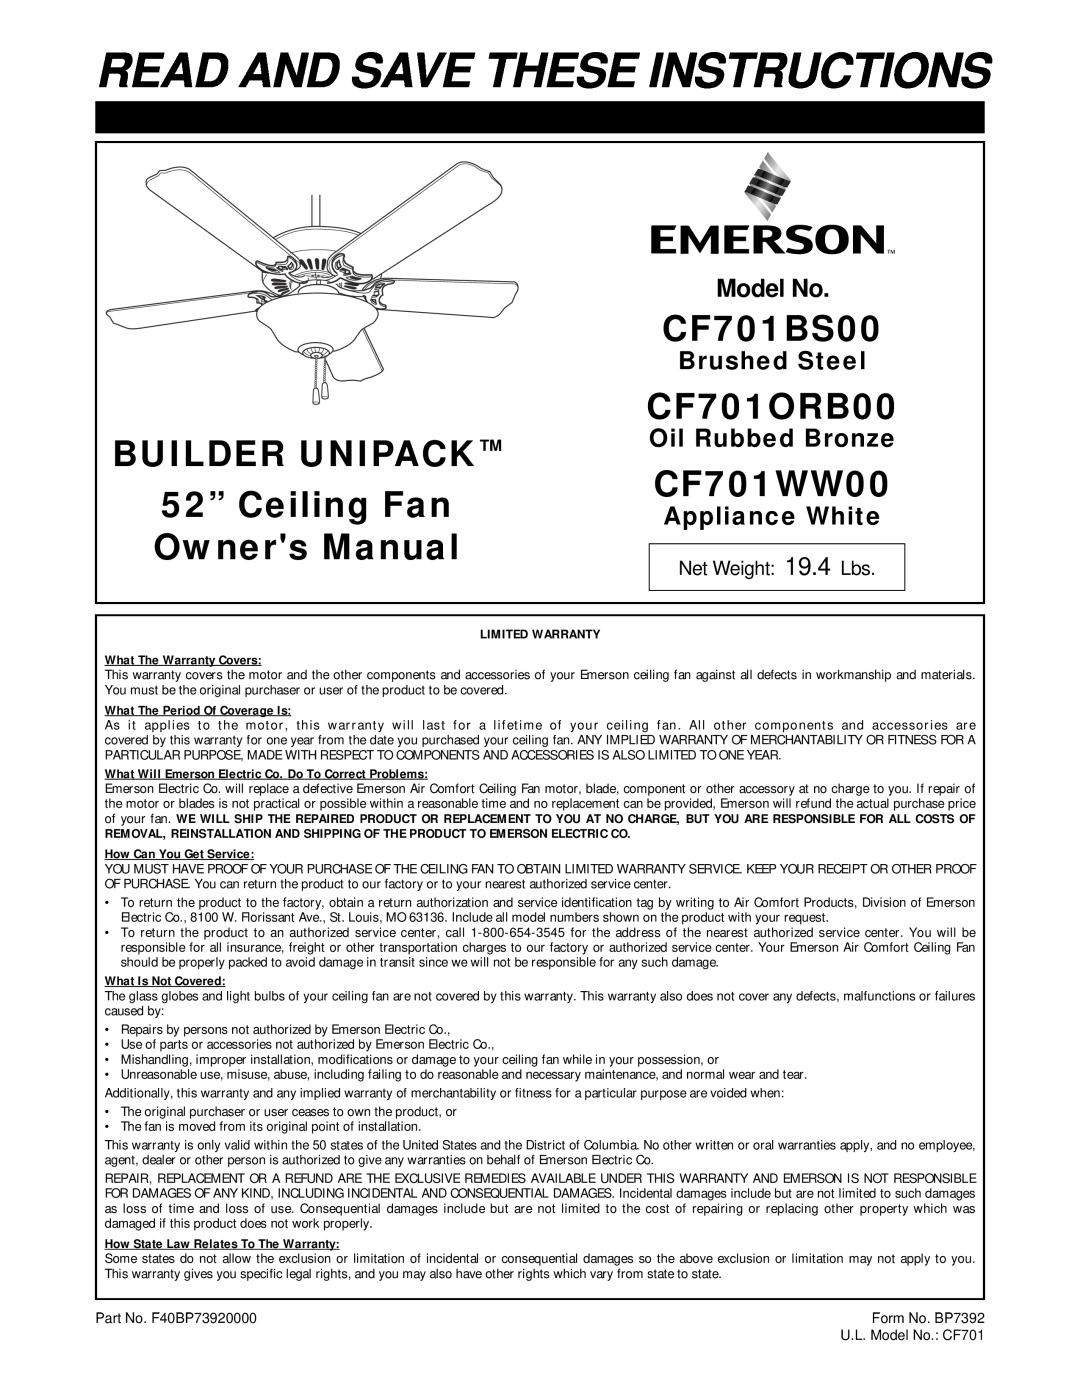 Emerson CF701ORB00 owner manual Model No, Brushed Steel, Oil Rubbed Bronze, Appliance White, CF701BS00, CF701WW00 